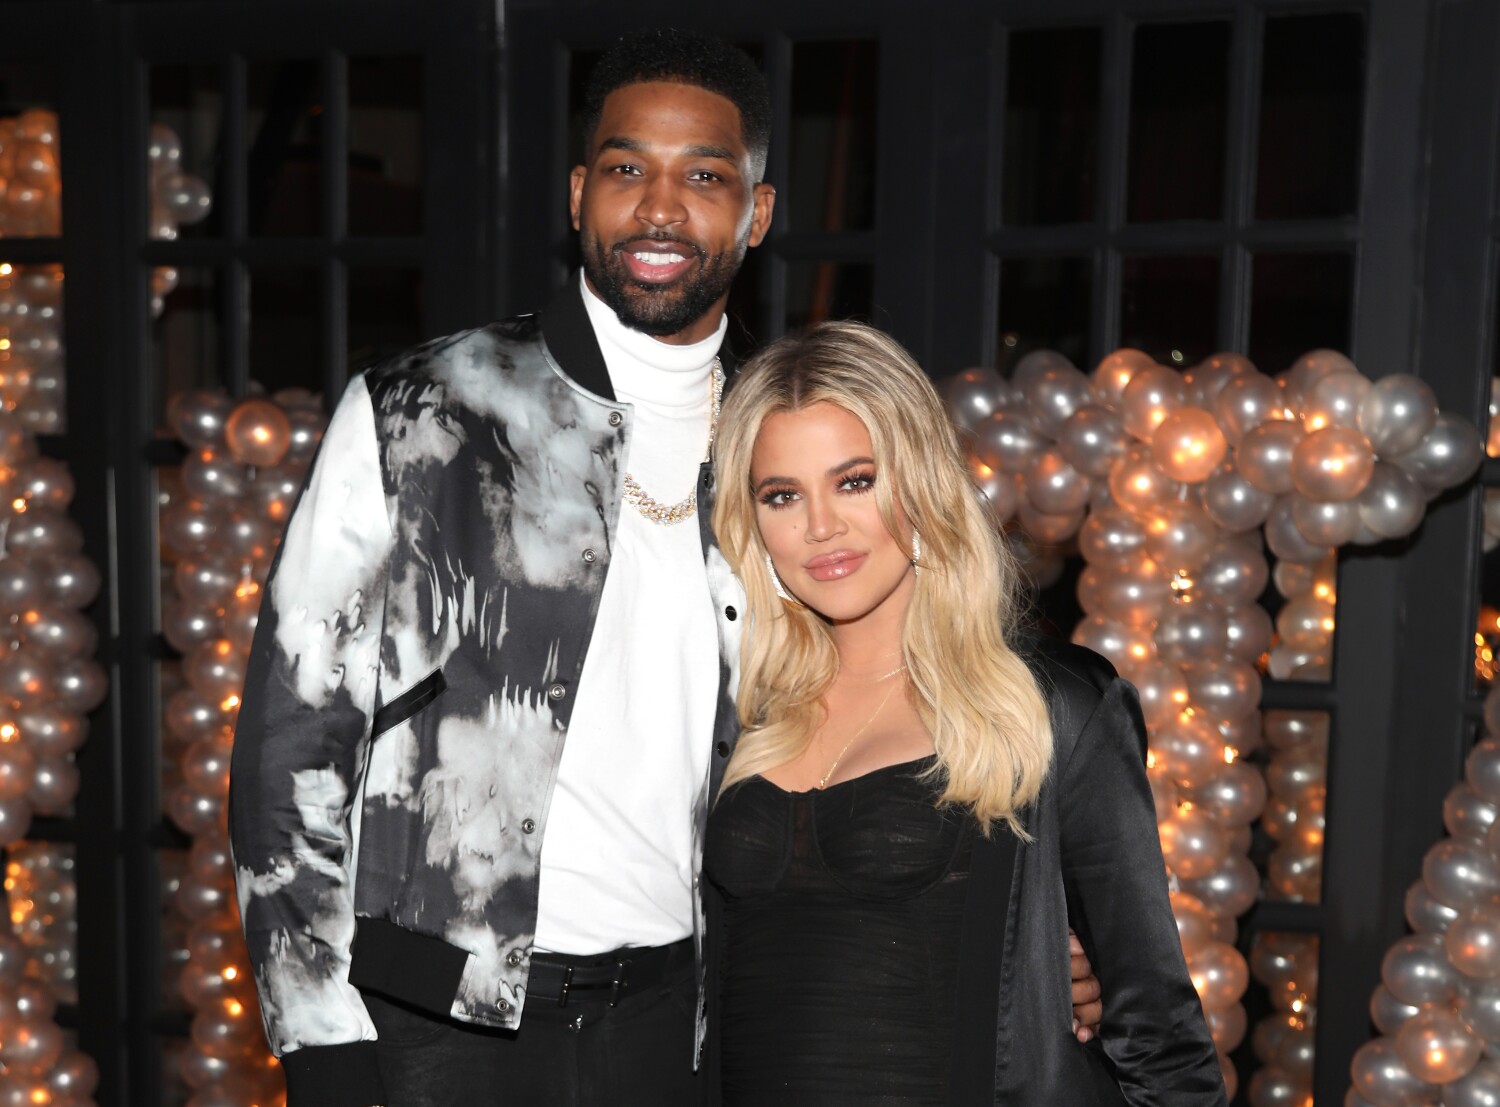 It's a boy! Khloé Kardashian and Tristan Thompson welcome their second child